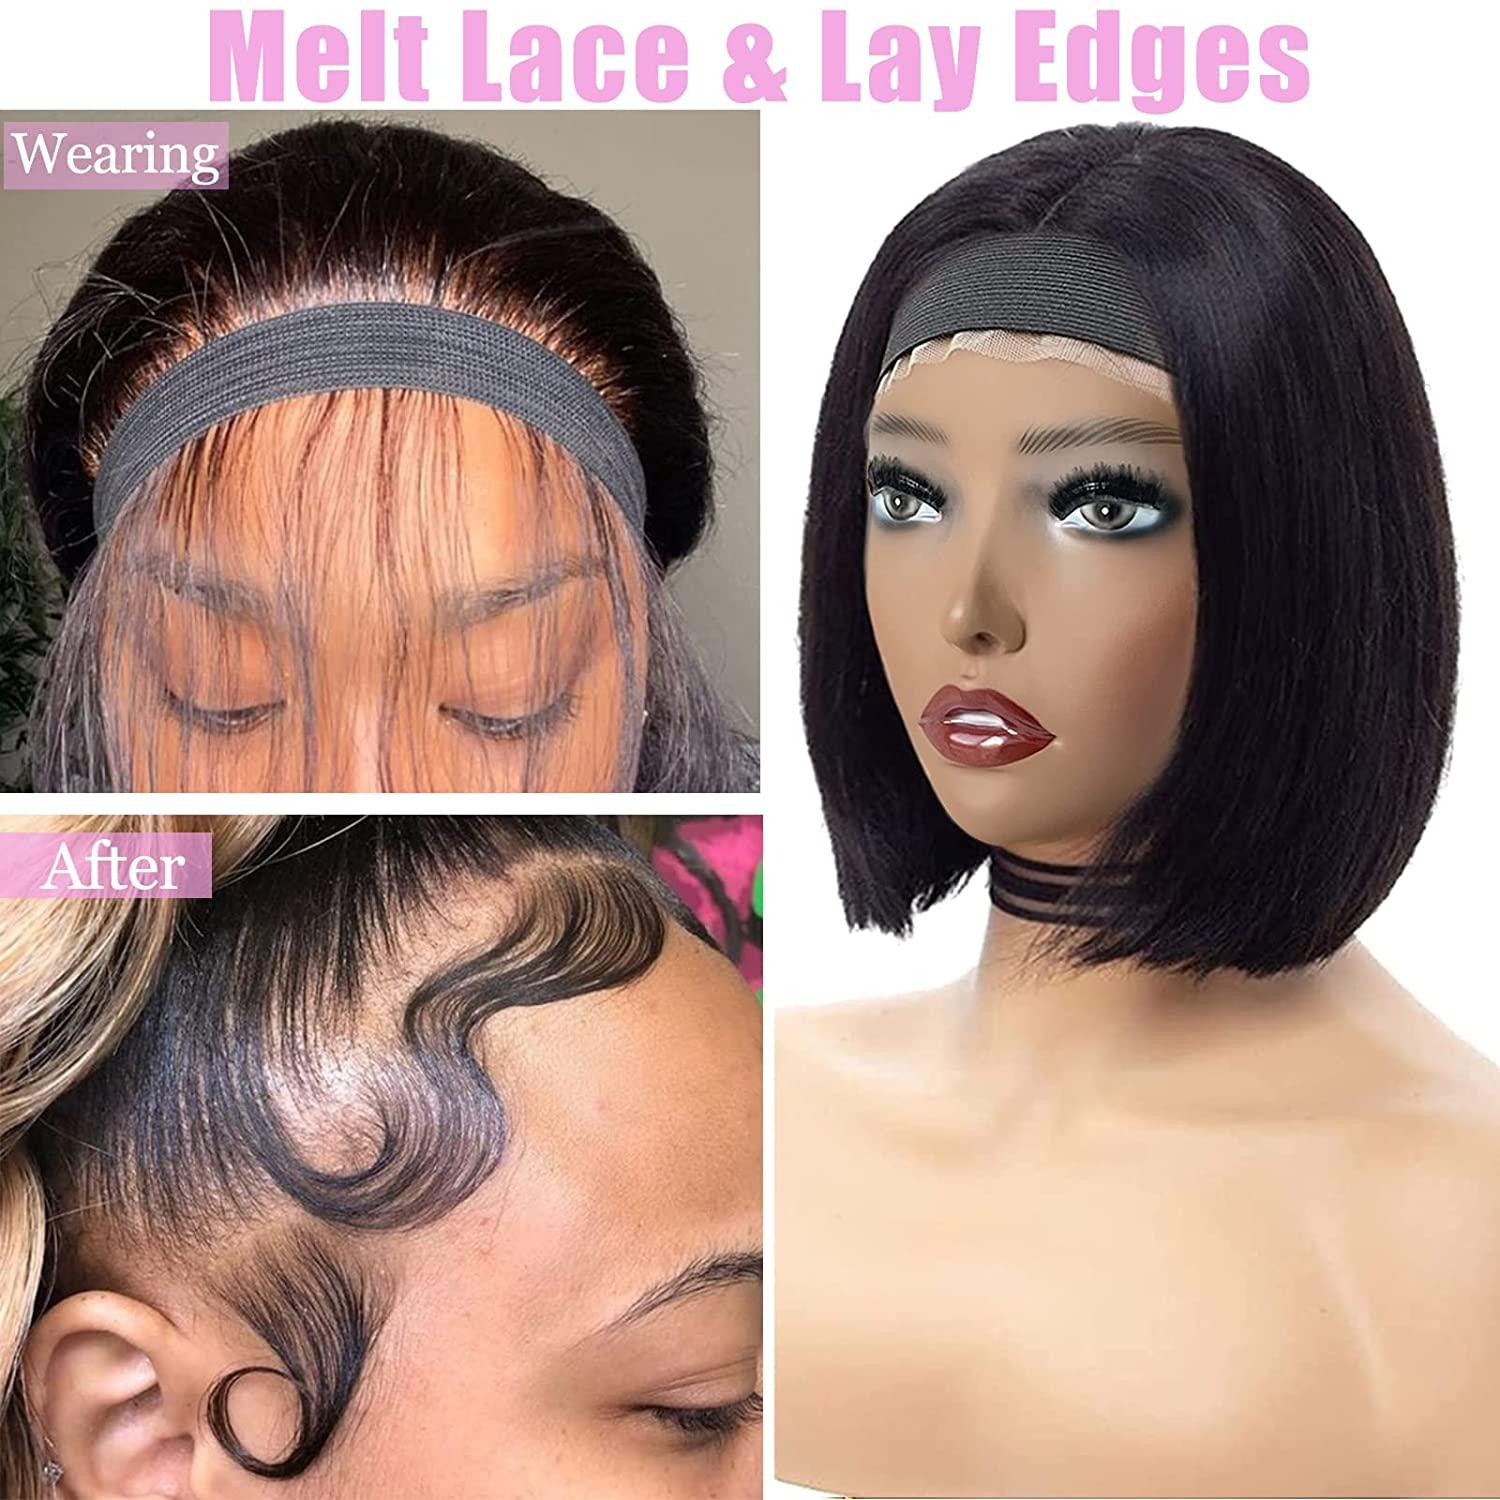 Lace Melting Band Elastic Band For Wigs Holding Band For Wigs Edge Wrap To  Lay Edges Wig Bands For Keeping Wigs In Wig Headband Lace Band Wig  Accessories Melt Band For Lace